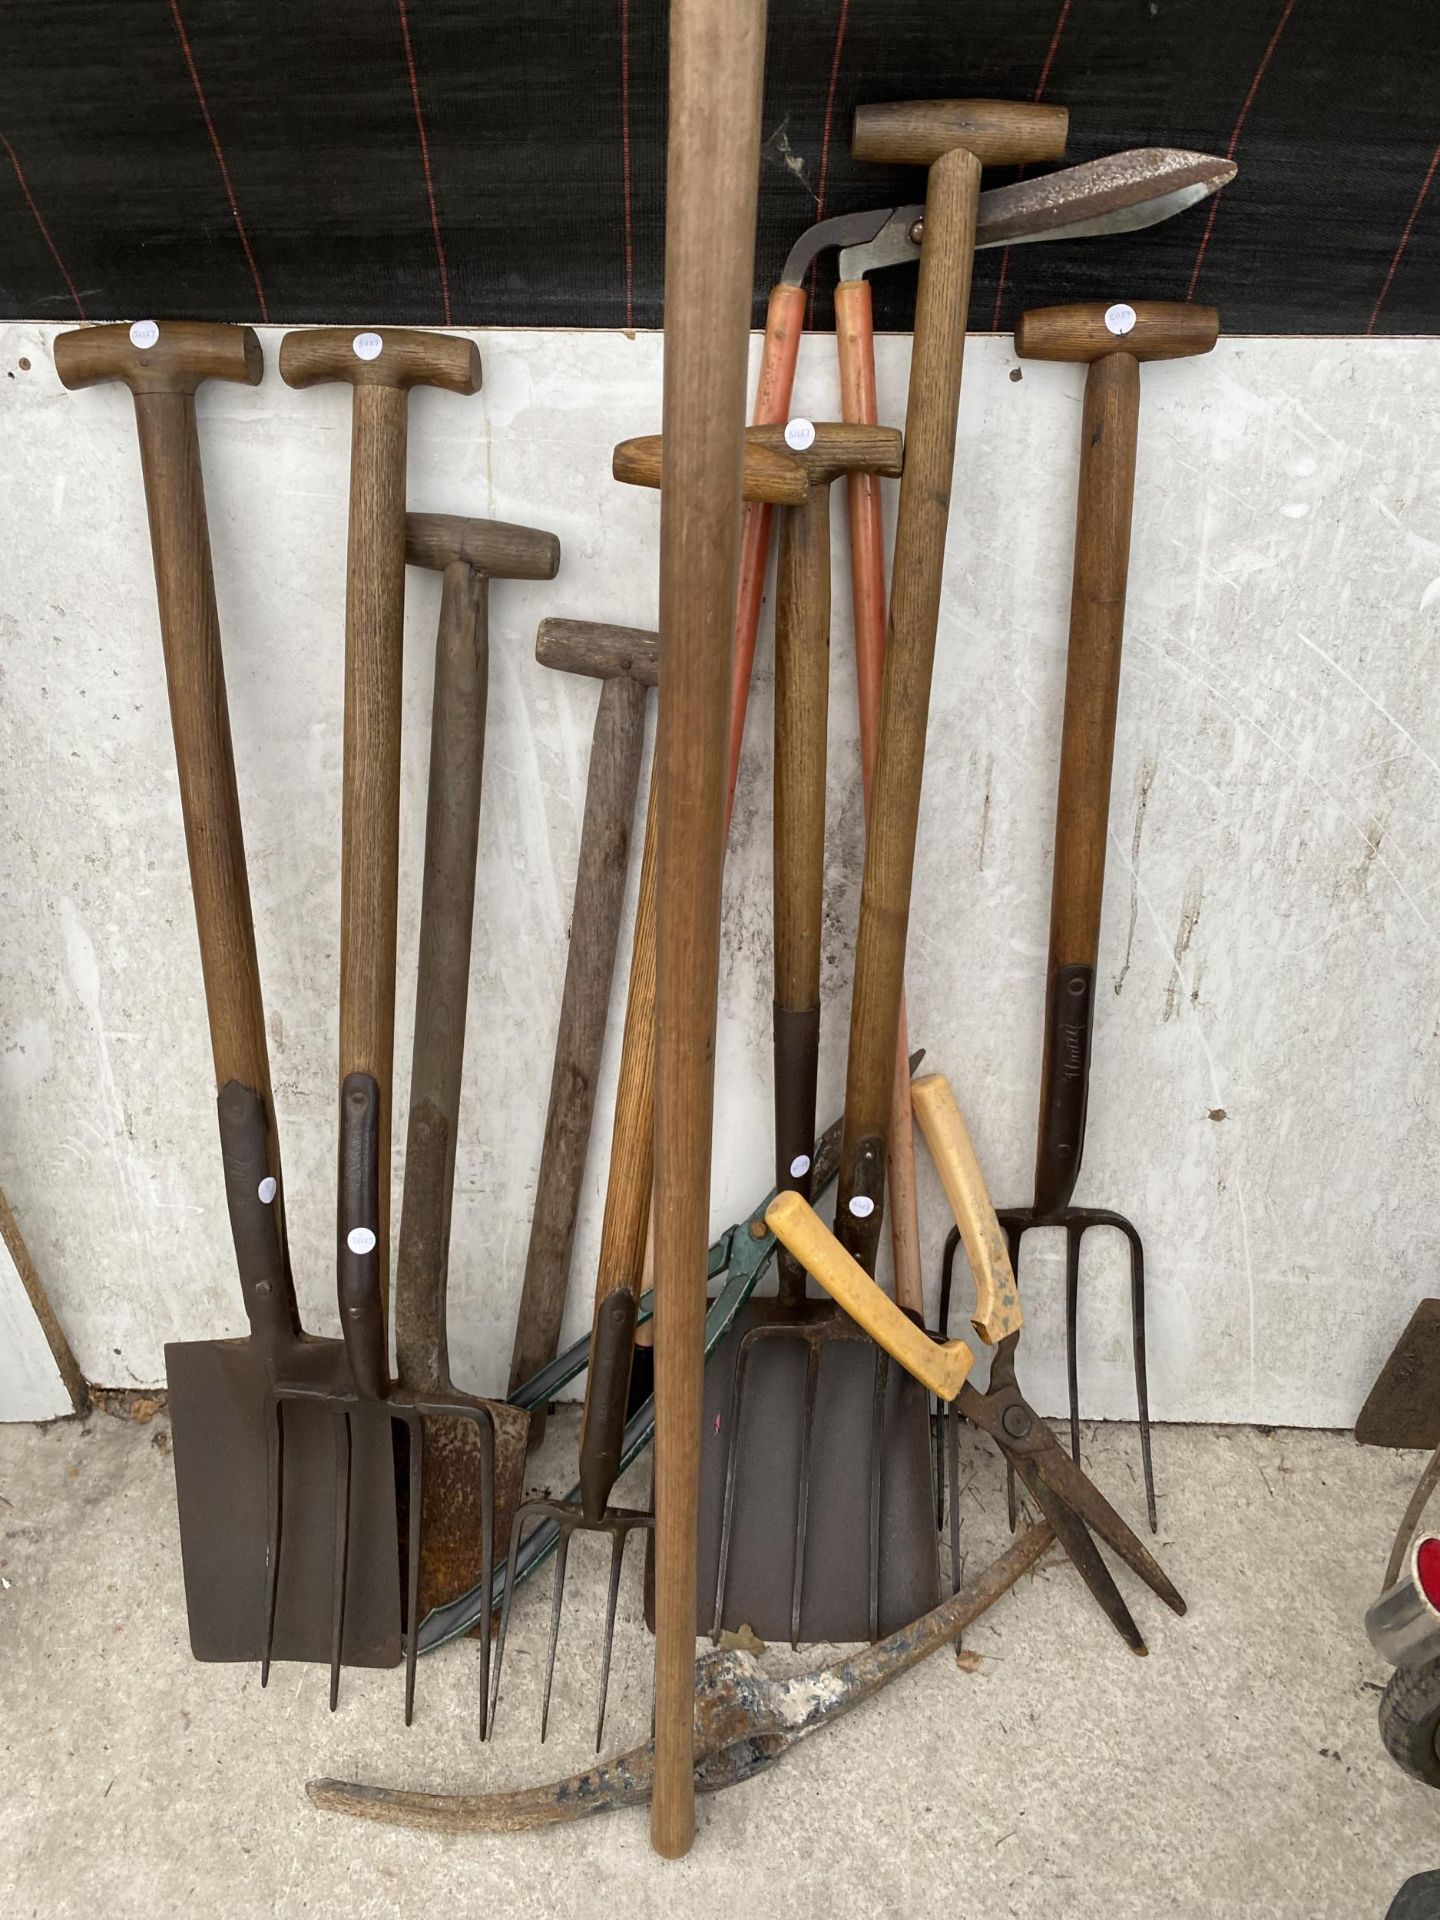 AN ASSORTMENT OF GARDEN TOOLS TO INCLUDE FORKS, SPADES AND A SHOVEL ETC - Image 2 of 3